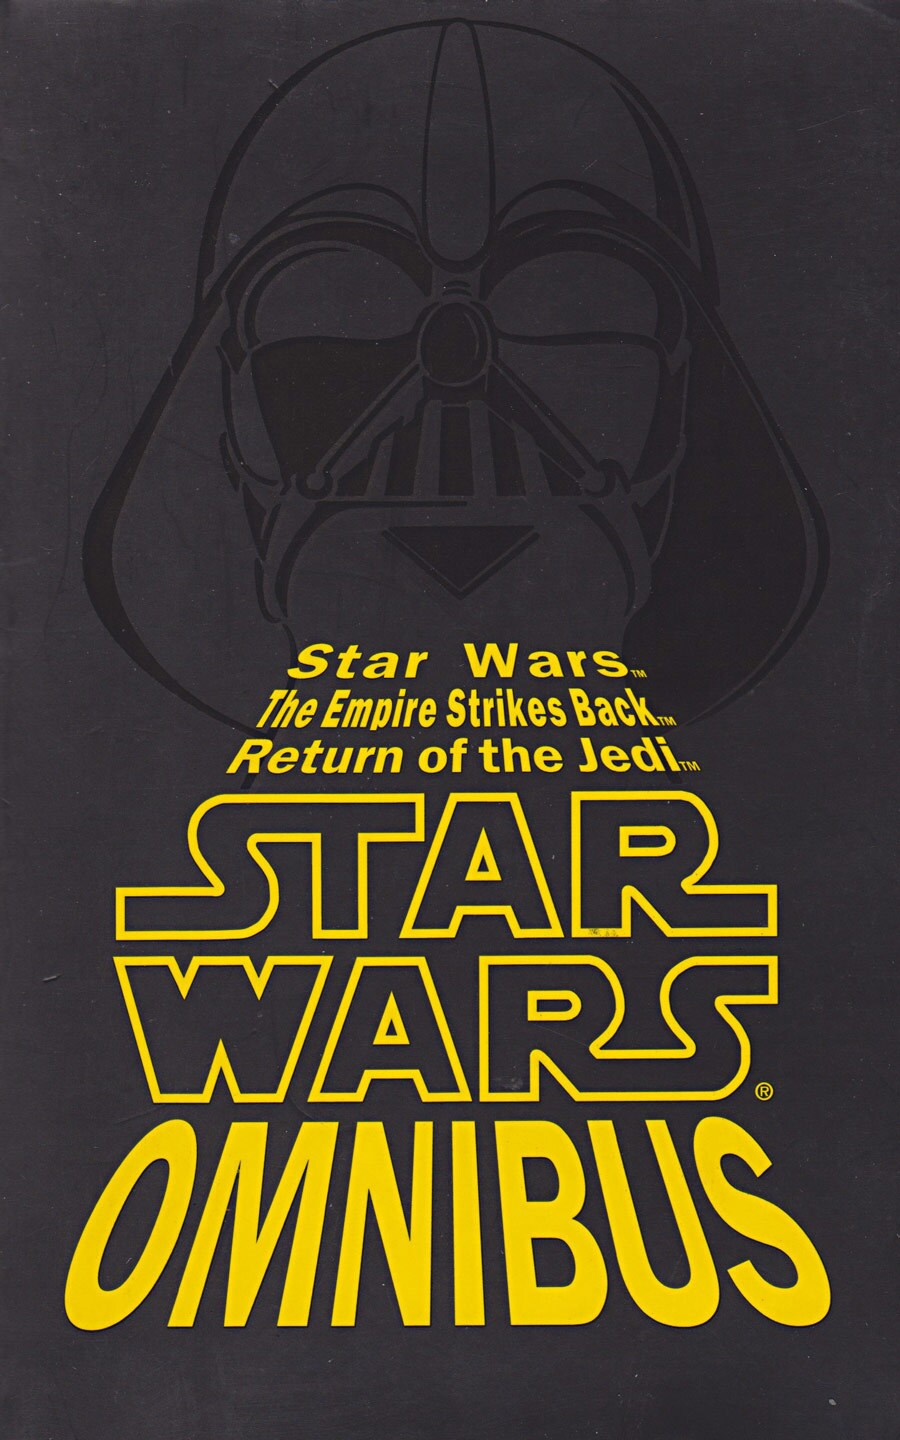 Darth Vader appears on the slipcase for Star Wars Omnibus, the UK version of the Star Wars trilogy book collection.